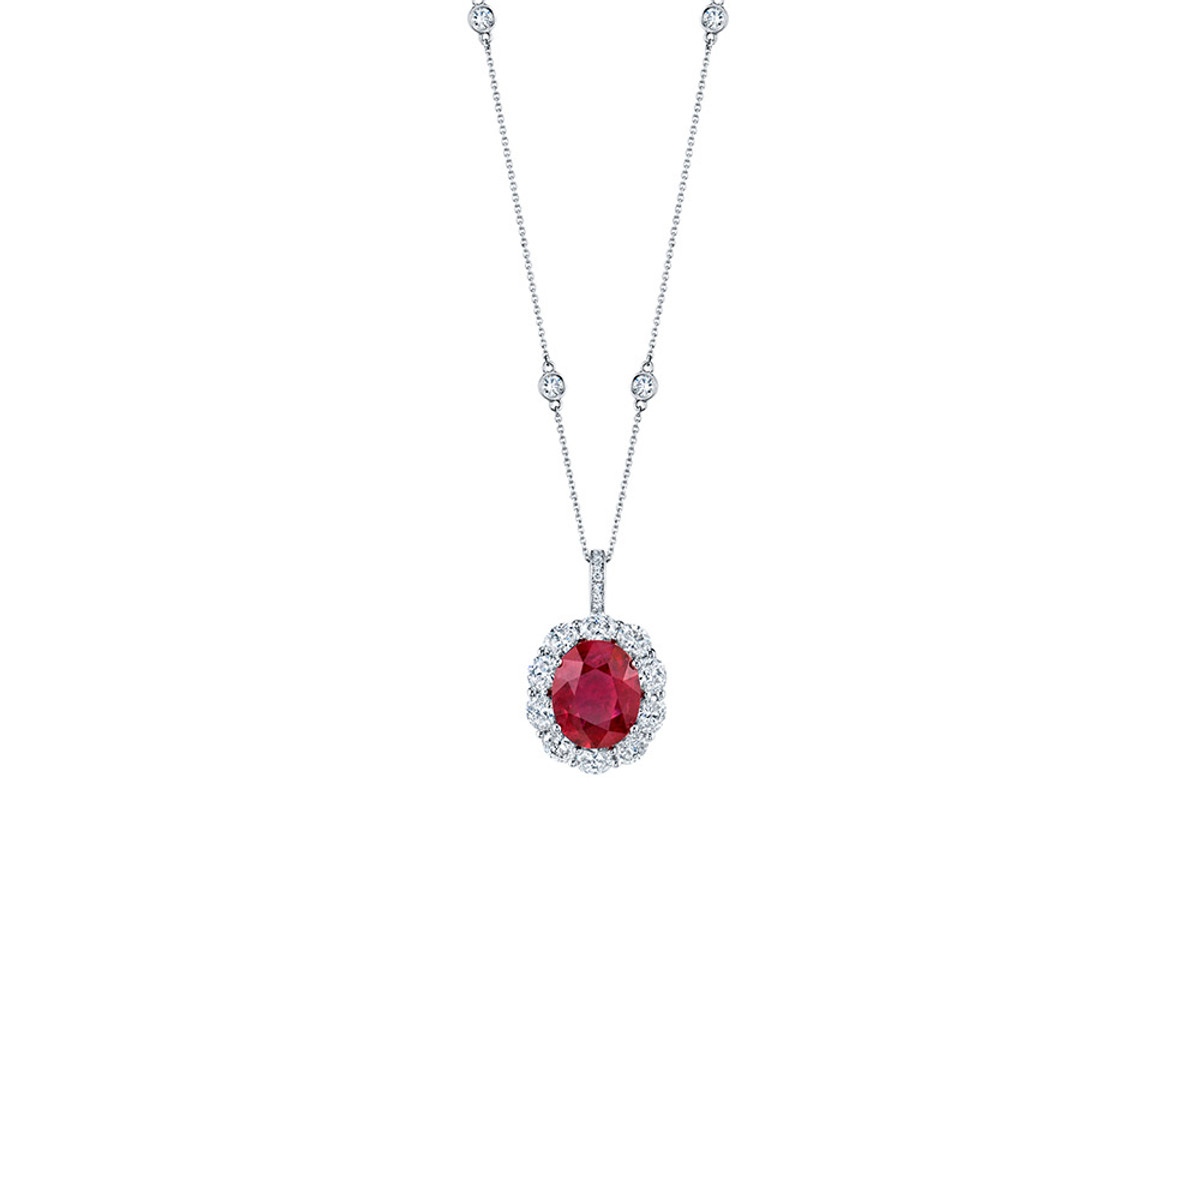 Hyde Park Collection Platinum Ruby and Diamond Halo Nicklaces-58179 Product Image